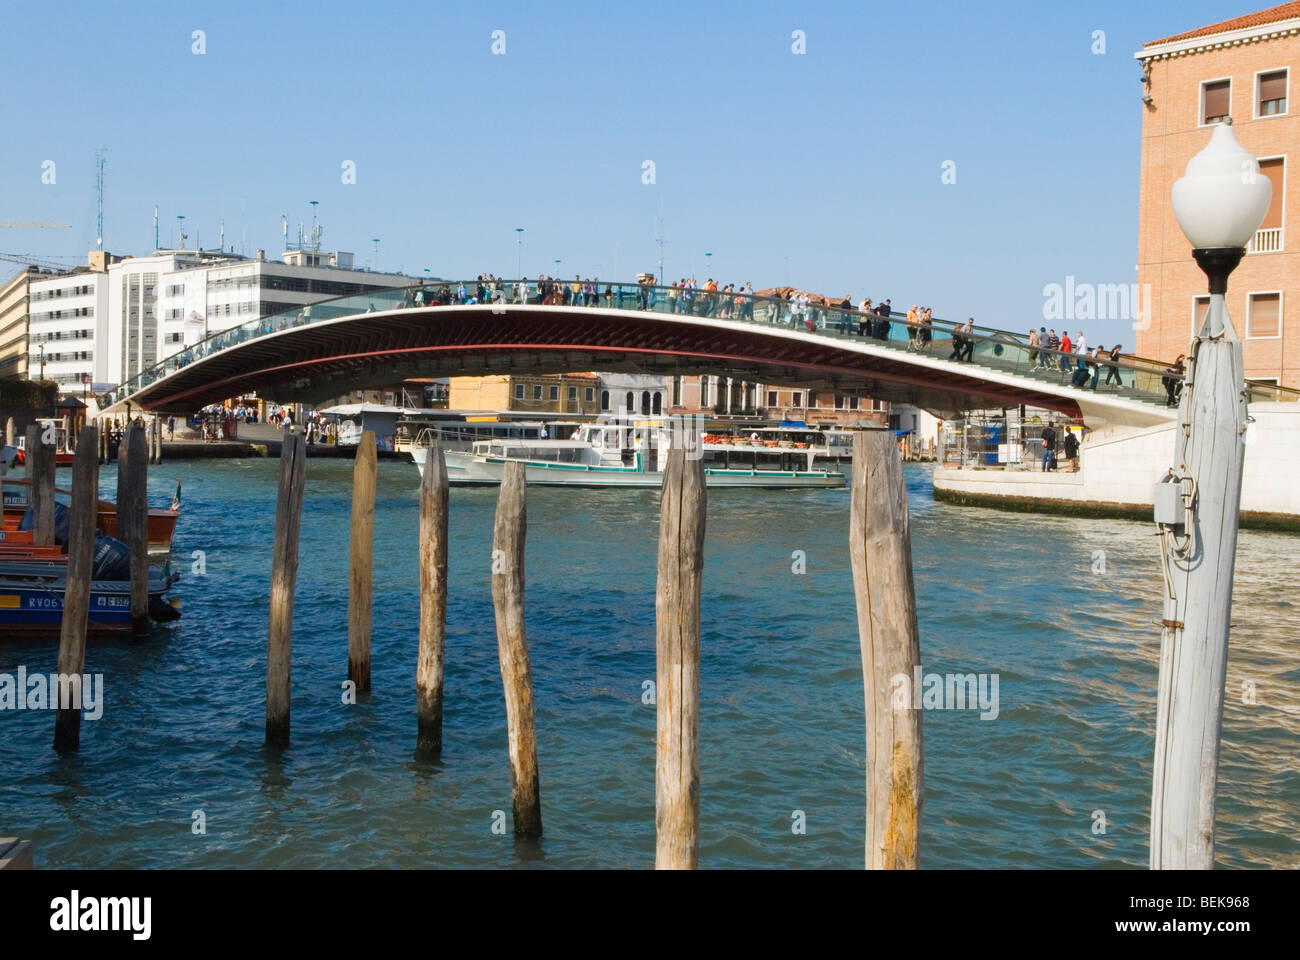 Venice Italy Tourists arrive in Venice walk over new bridge over the Grand Canal from Piazza Roma. HOMER SYKES Stock Photo